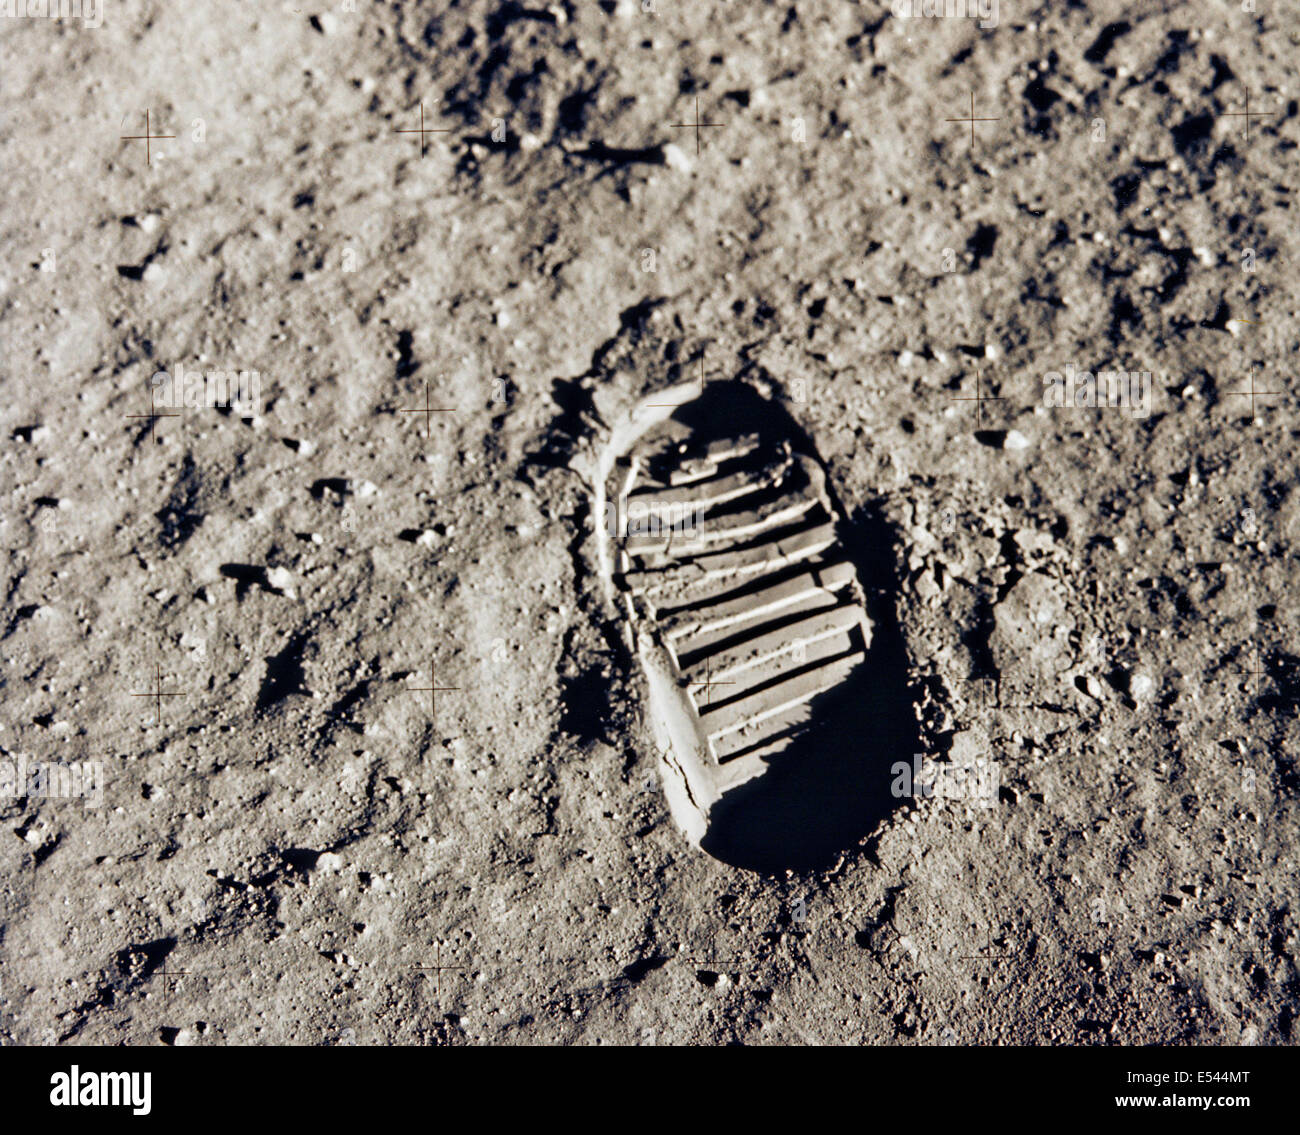 Photograph of the bootprint of astronaut Buzz Aldrin on the lunar surface during the Apollo 11 mission to the Moon July 20, 1969. Neil Armstrong and Buzz Aldrin became the first men to walk on the Moon. Stock Photo